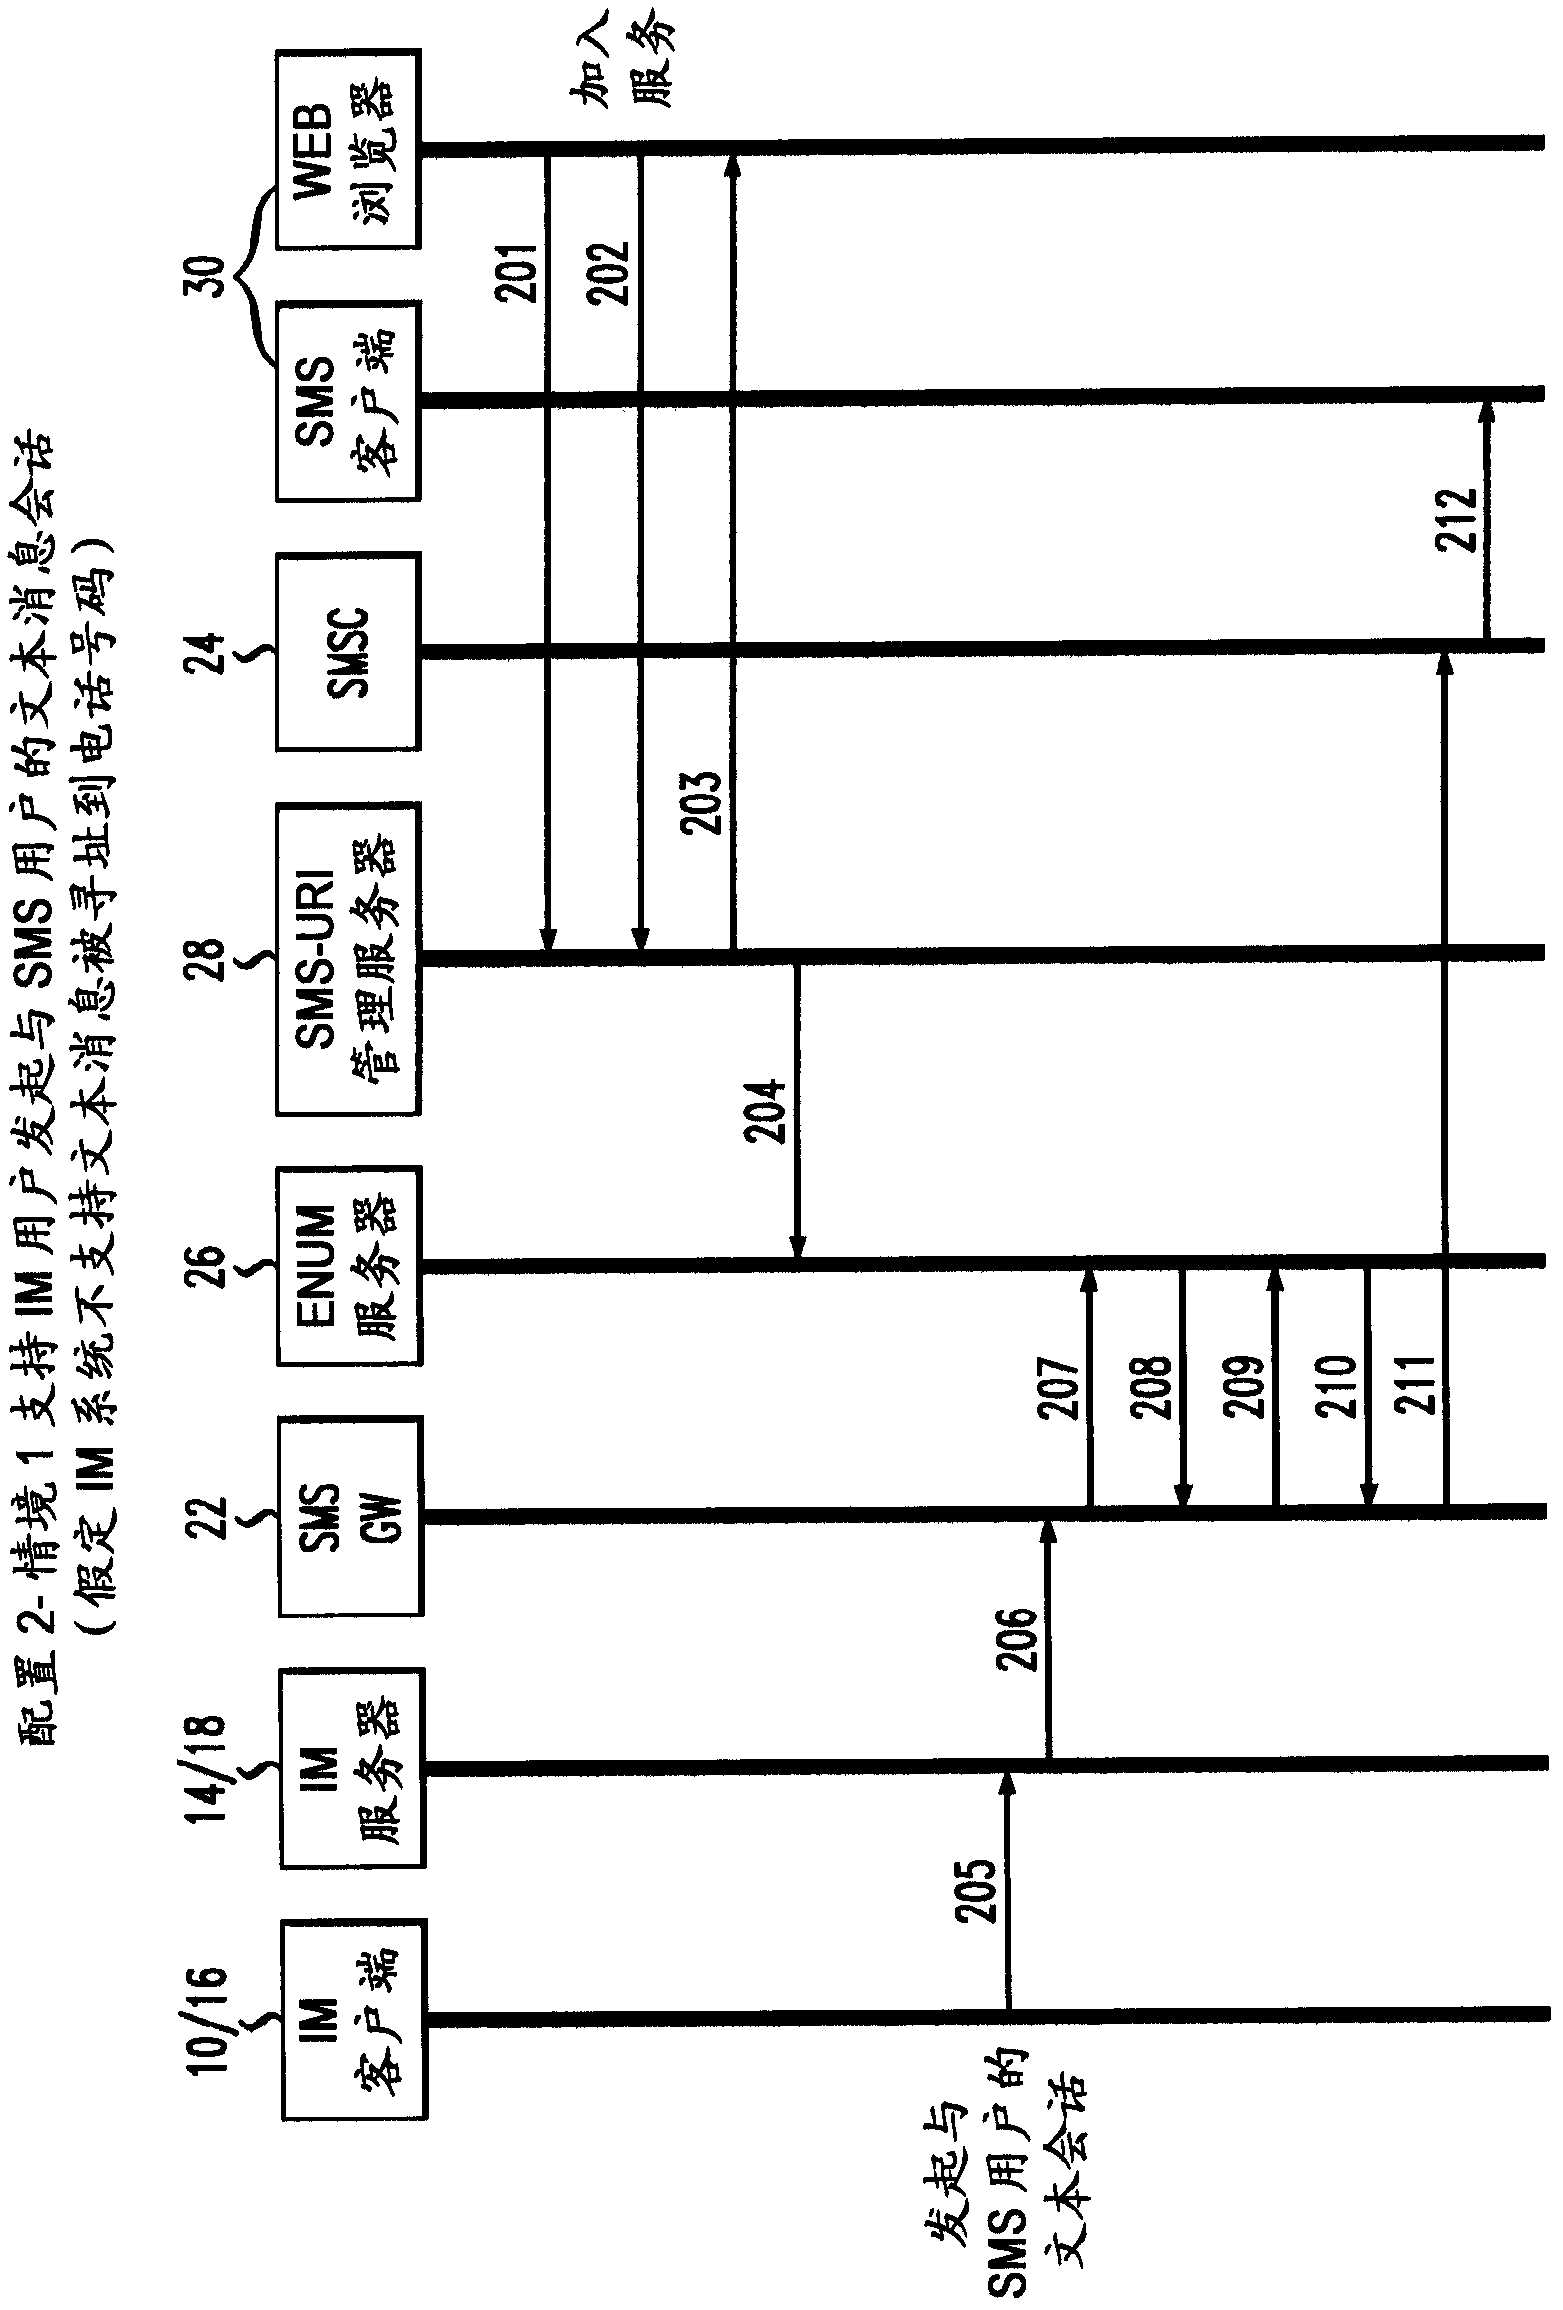 A method and system for interworking between instant messaging service and short message service